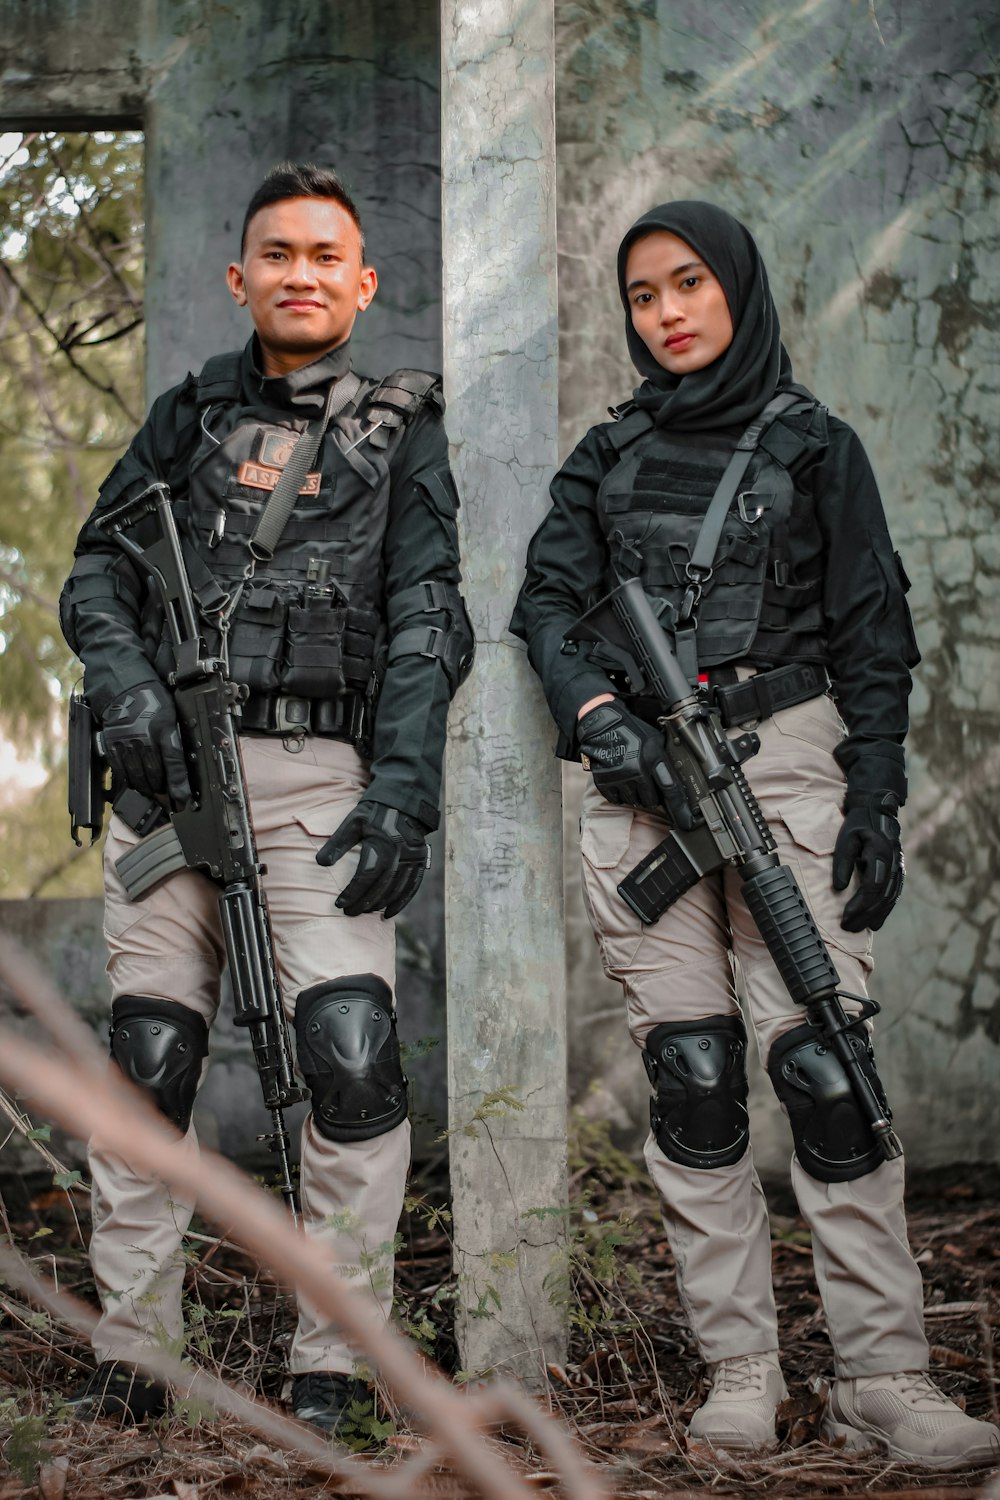 a man and woman in military uniforms